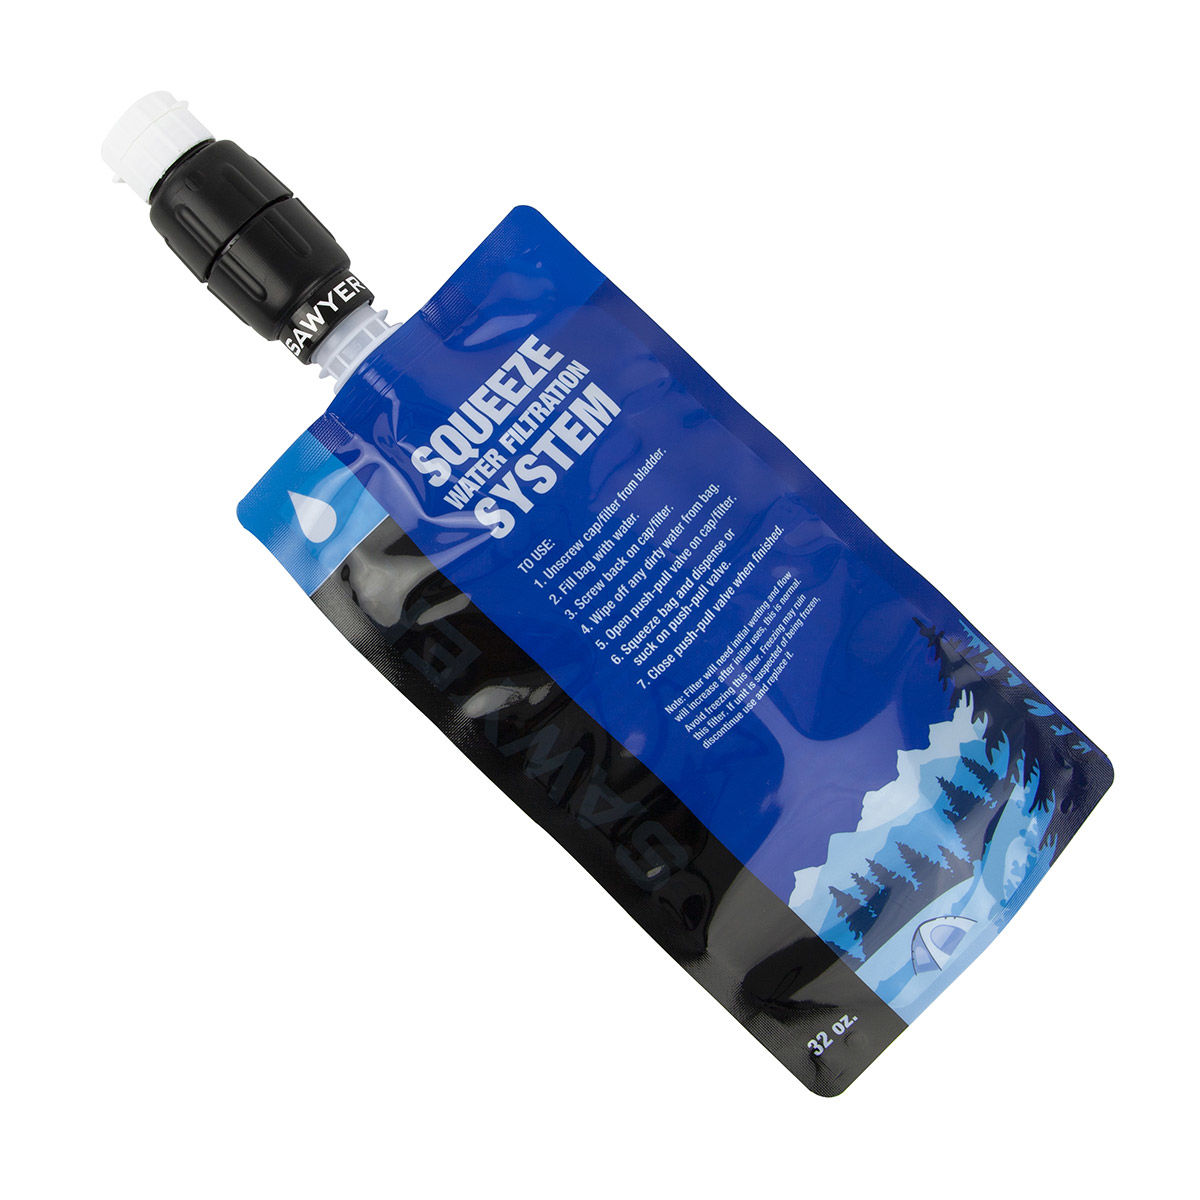 Sawyer Mini Original Water Filter Value Set with 3 x 1 Litre or 2 x 2 Litre drinking bags